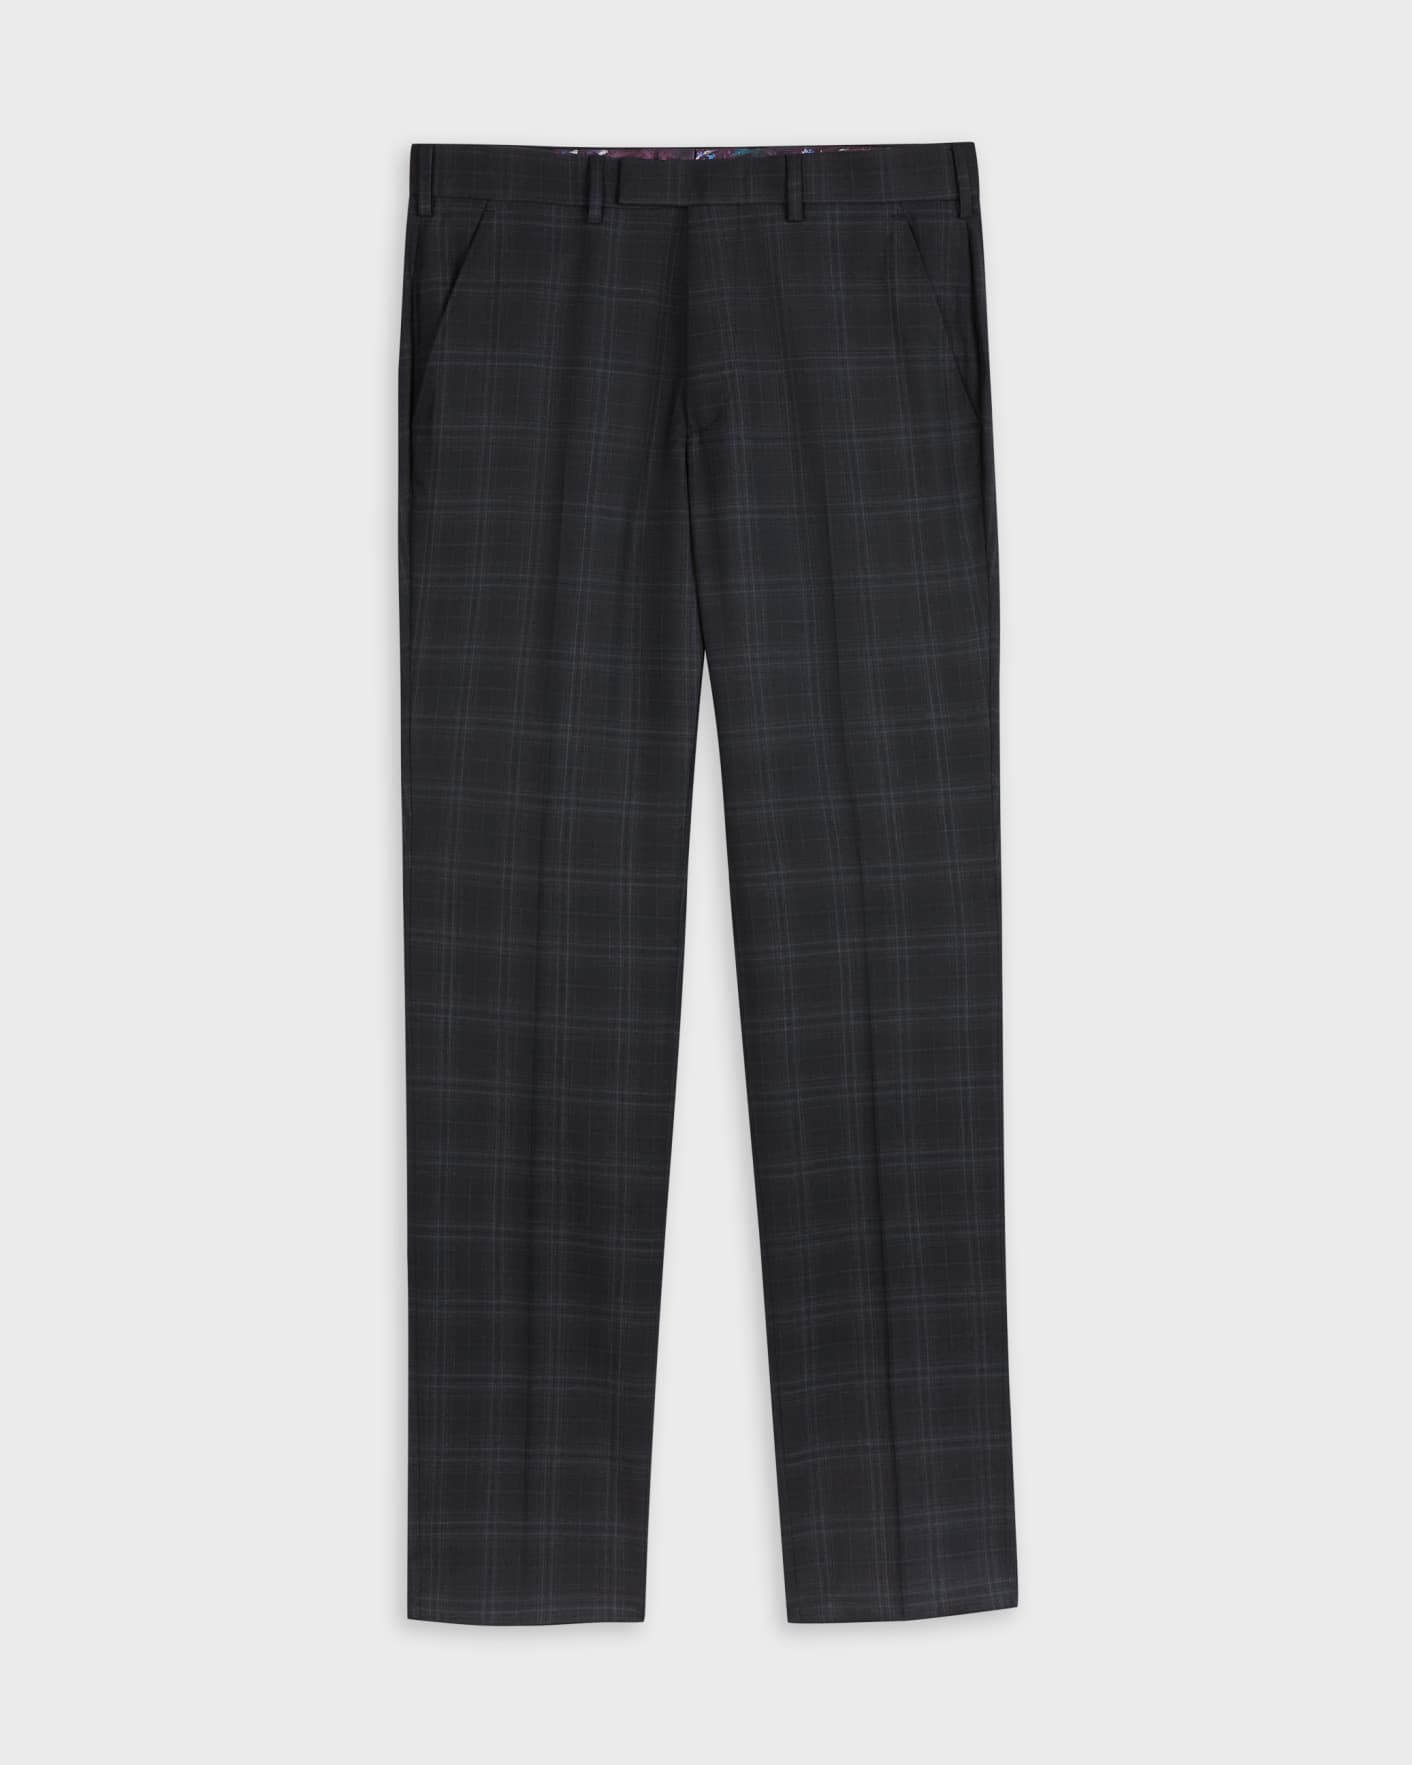 Navy STERLING CHECK SUIT TROUSER Ted Baker